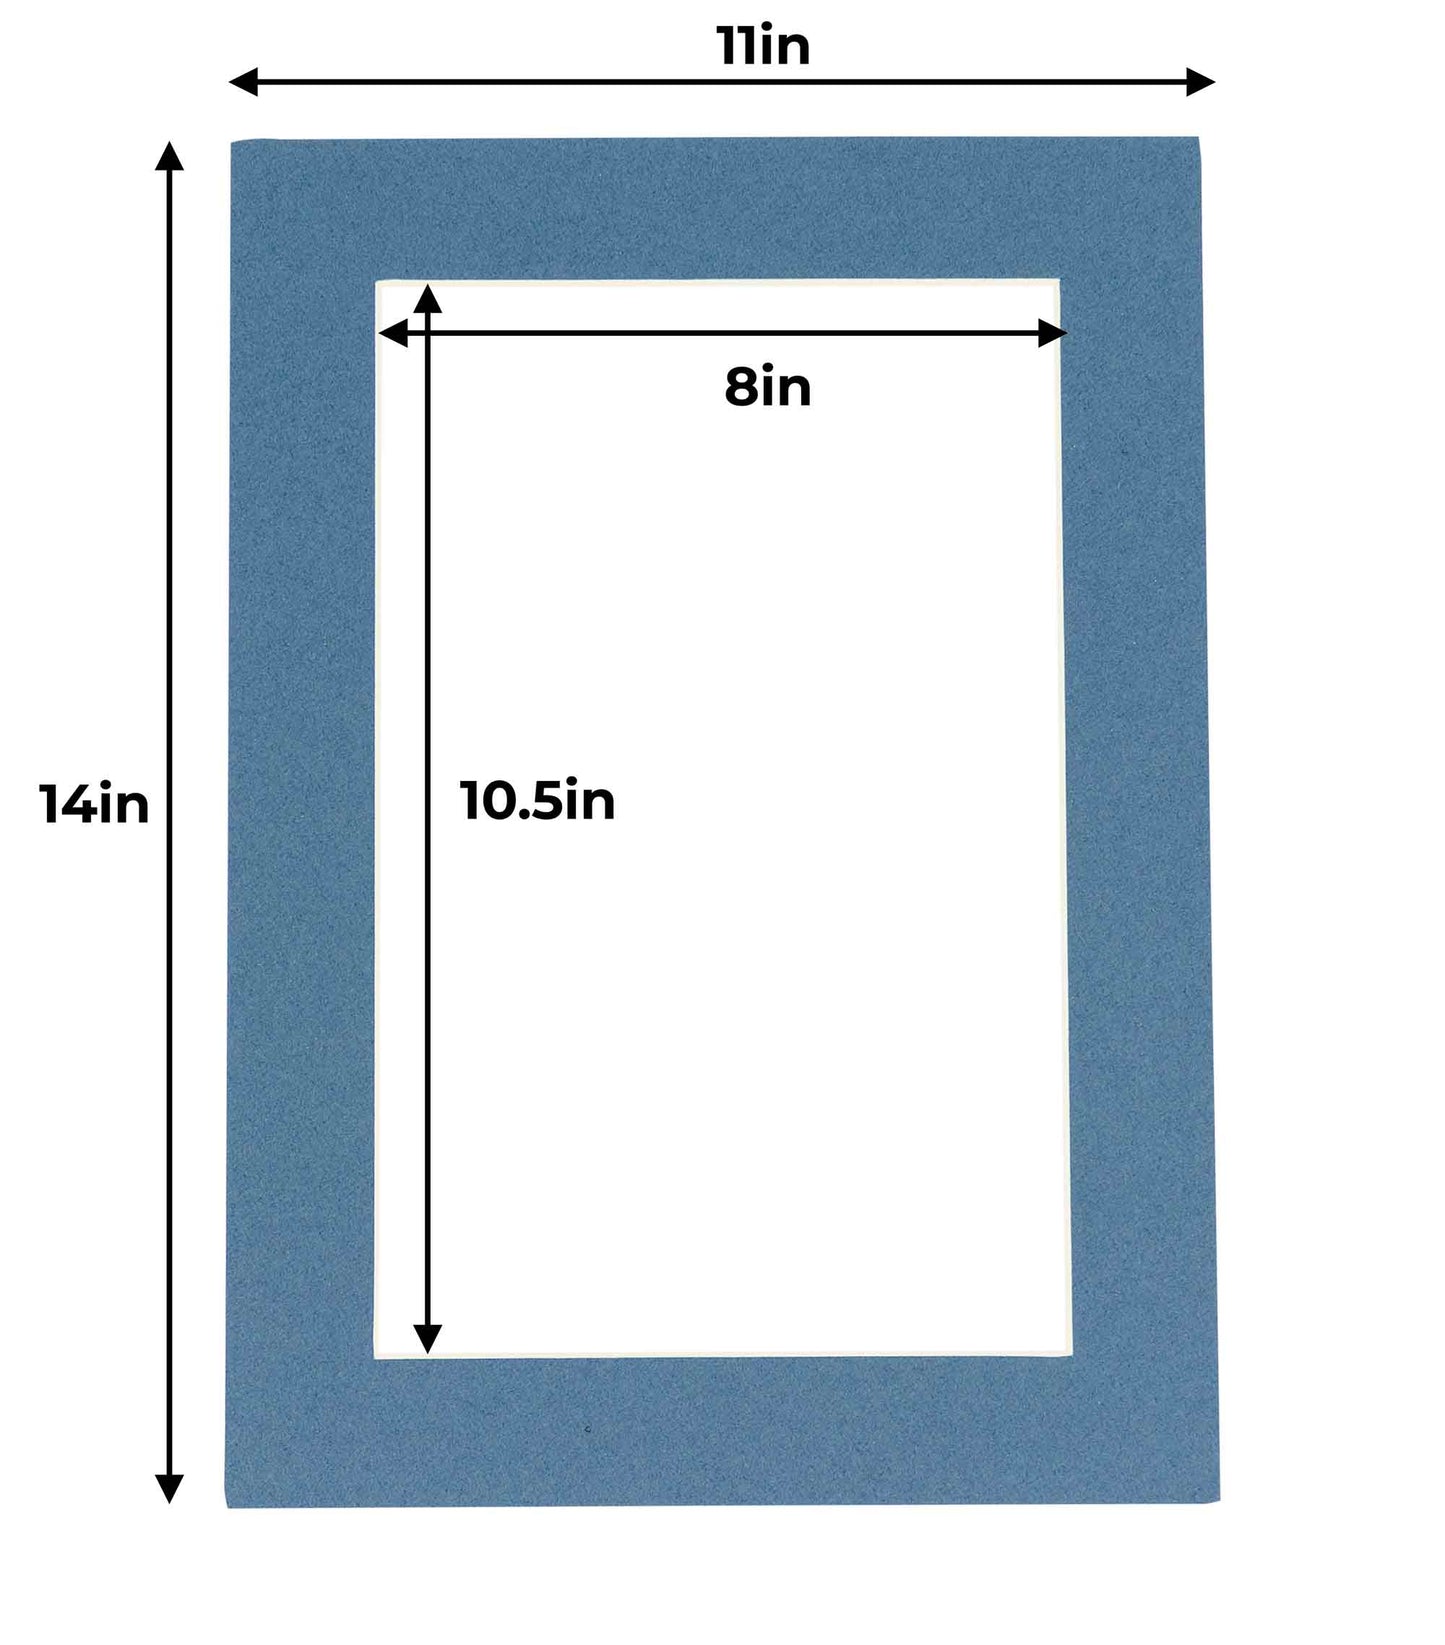 Pack of 10 Steel Blue Precut Acid-Free Matboard Set with Clear Bags & Backings